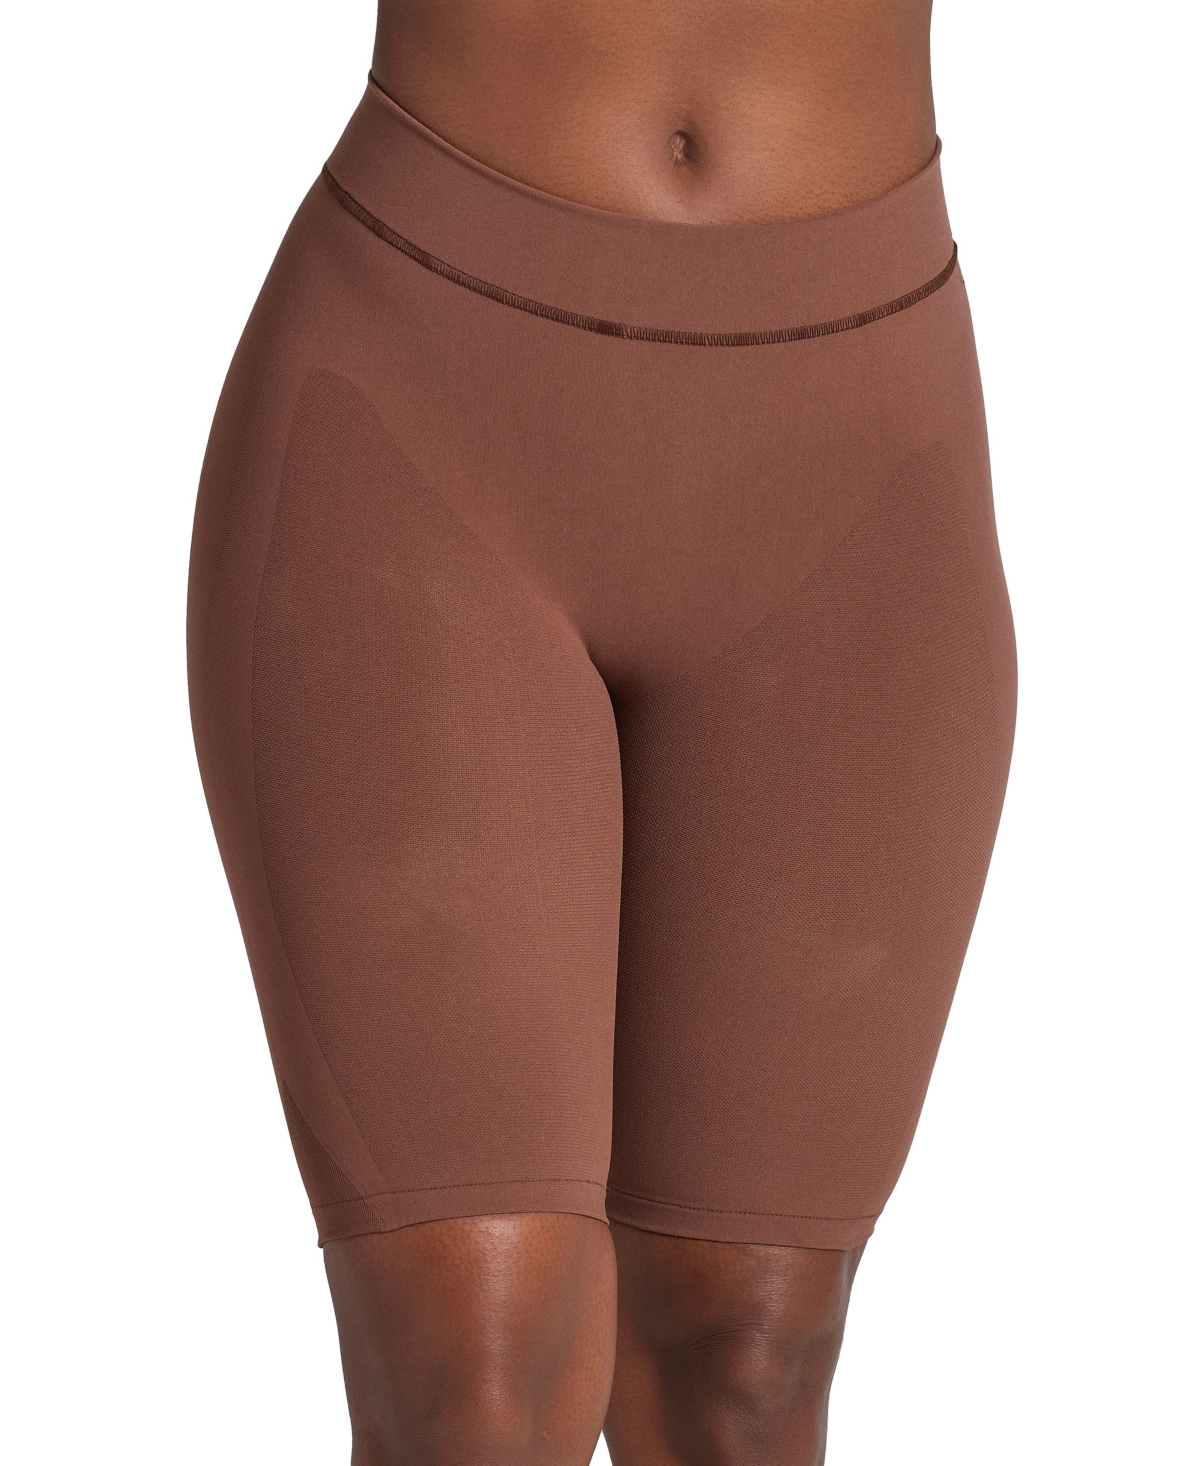 Leonisa Well-rounded Invisible Butt Lifter Shaper Short In Dark Brown